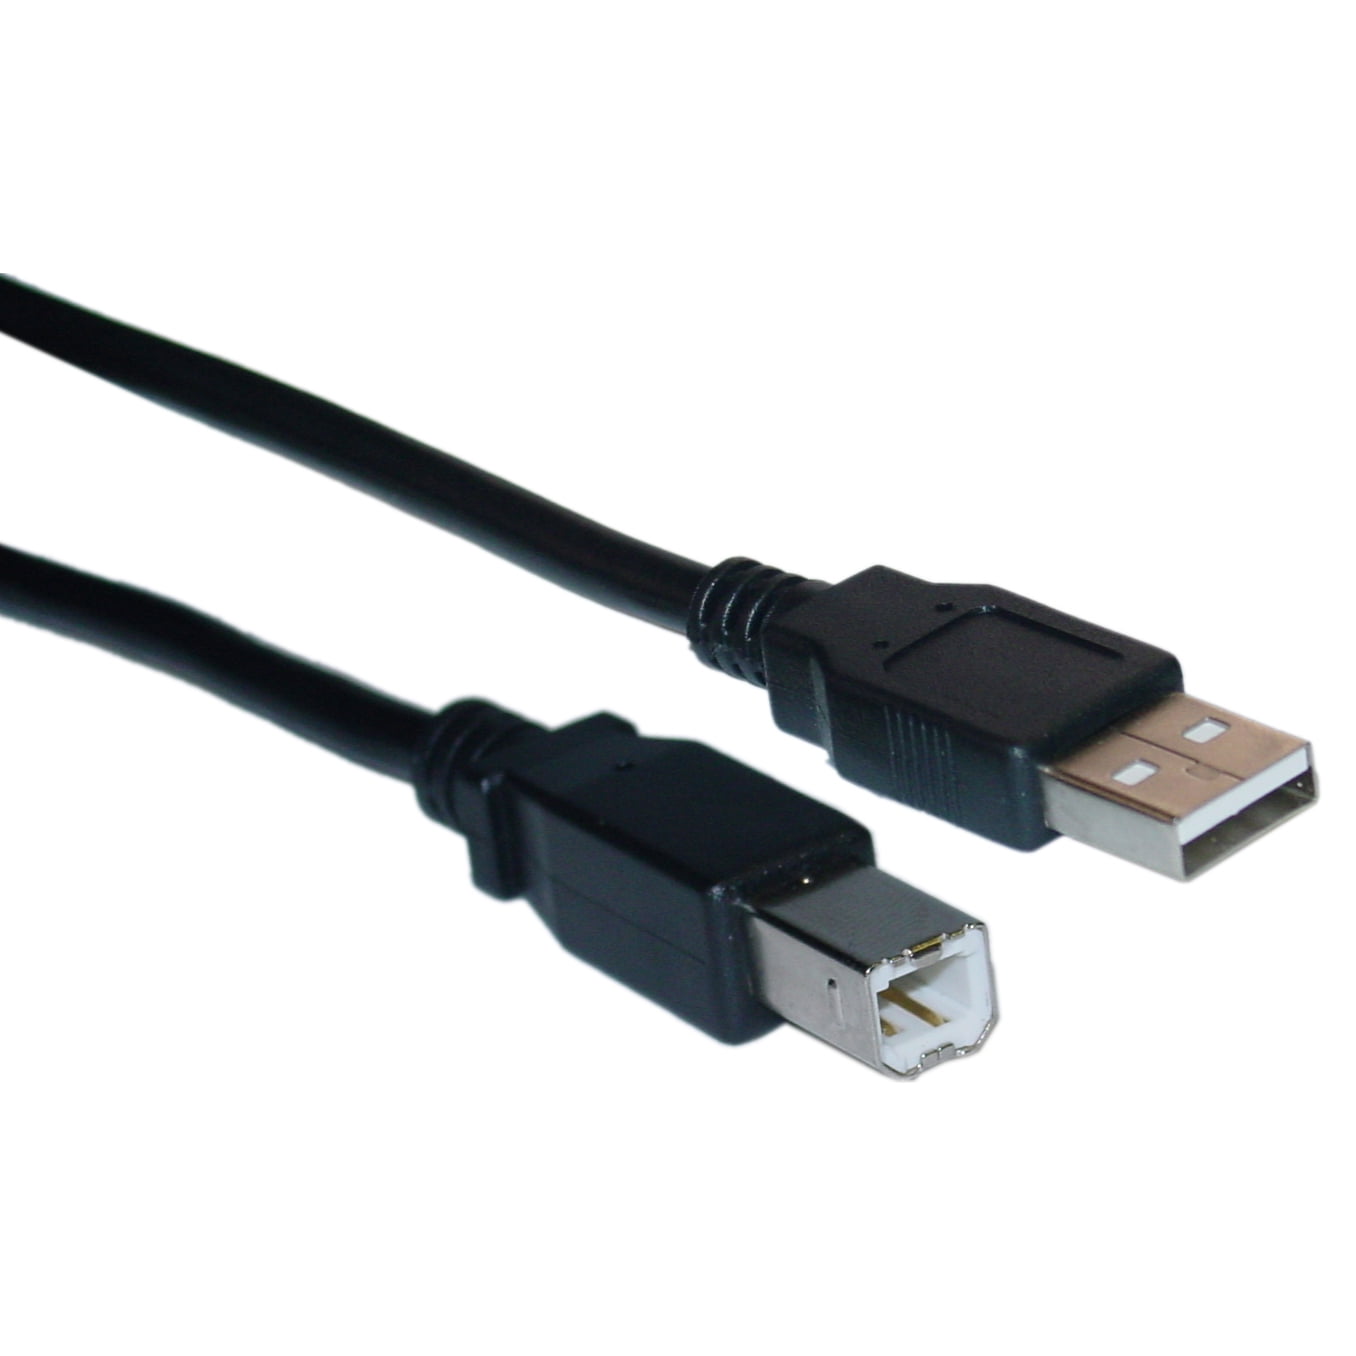 Type A Male to Type B Male USB 2.0 Printer Scanner Cable BLACK 3.3ft/1m Length 